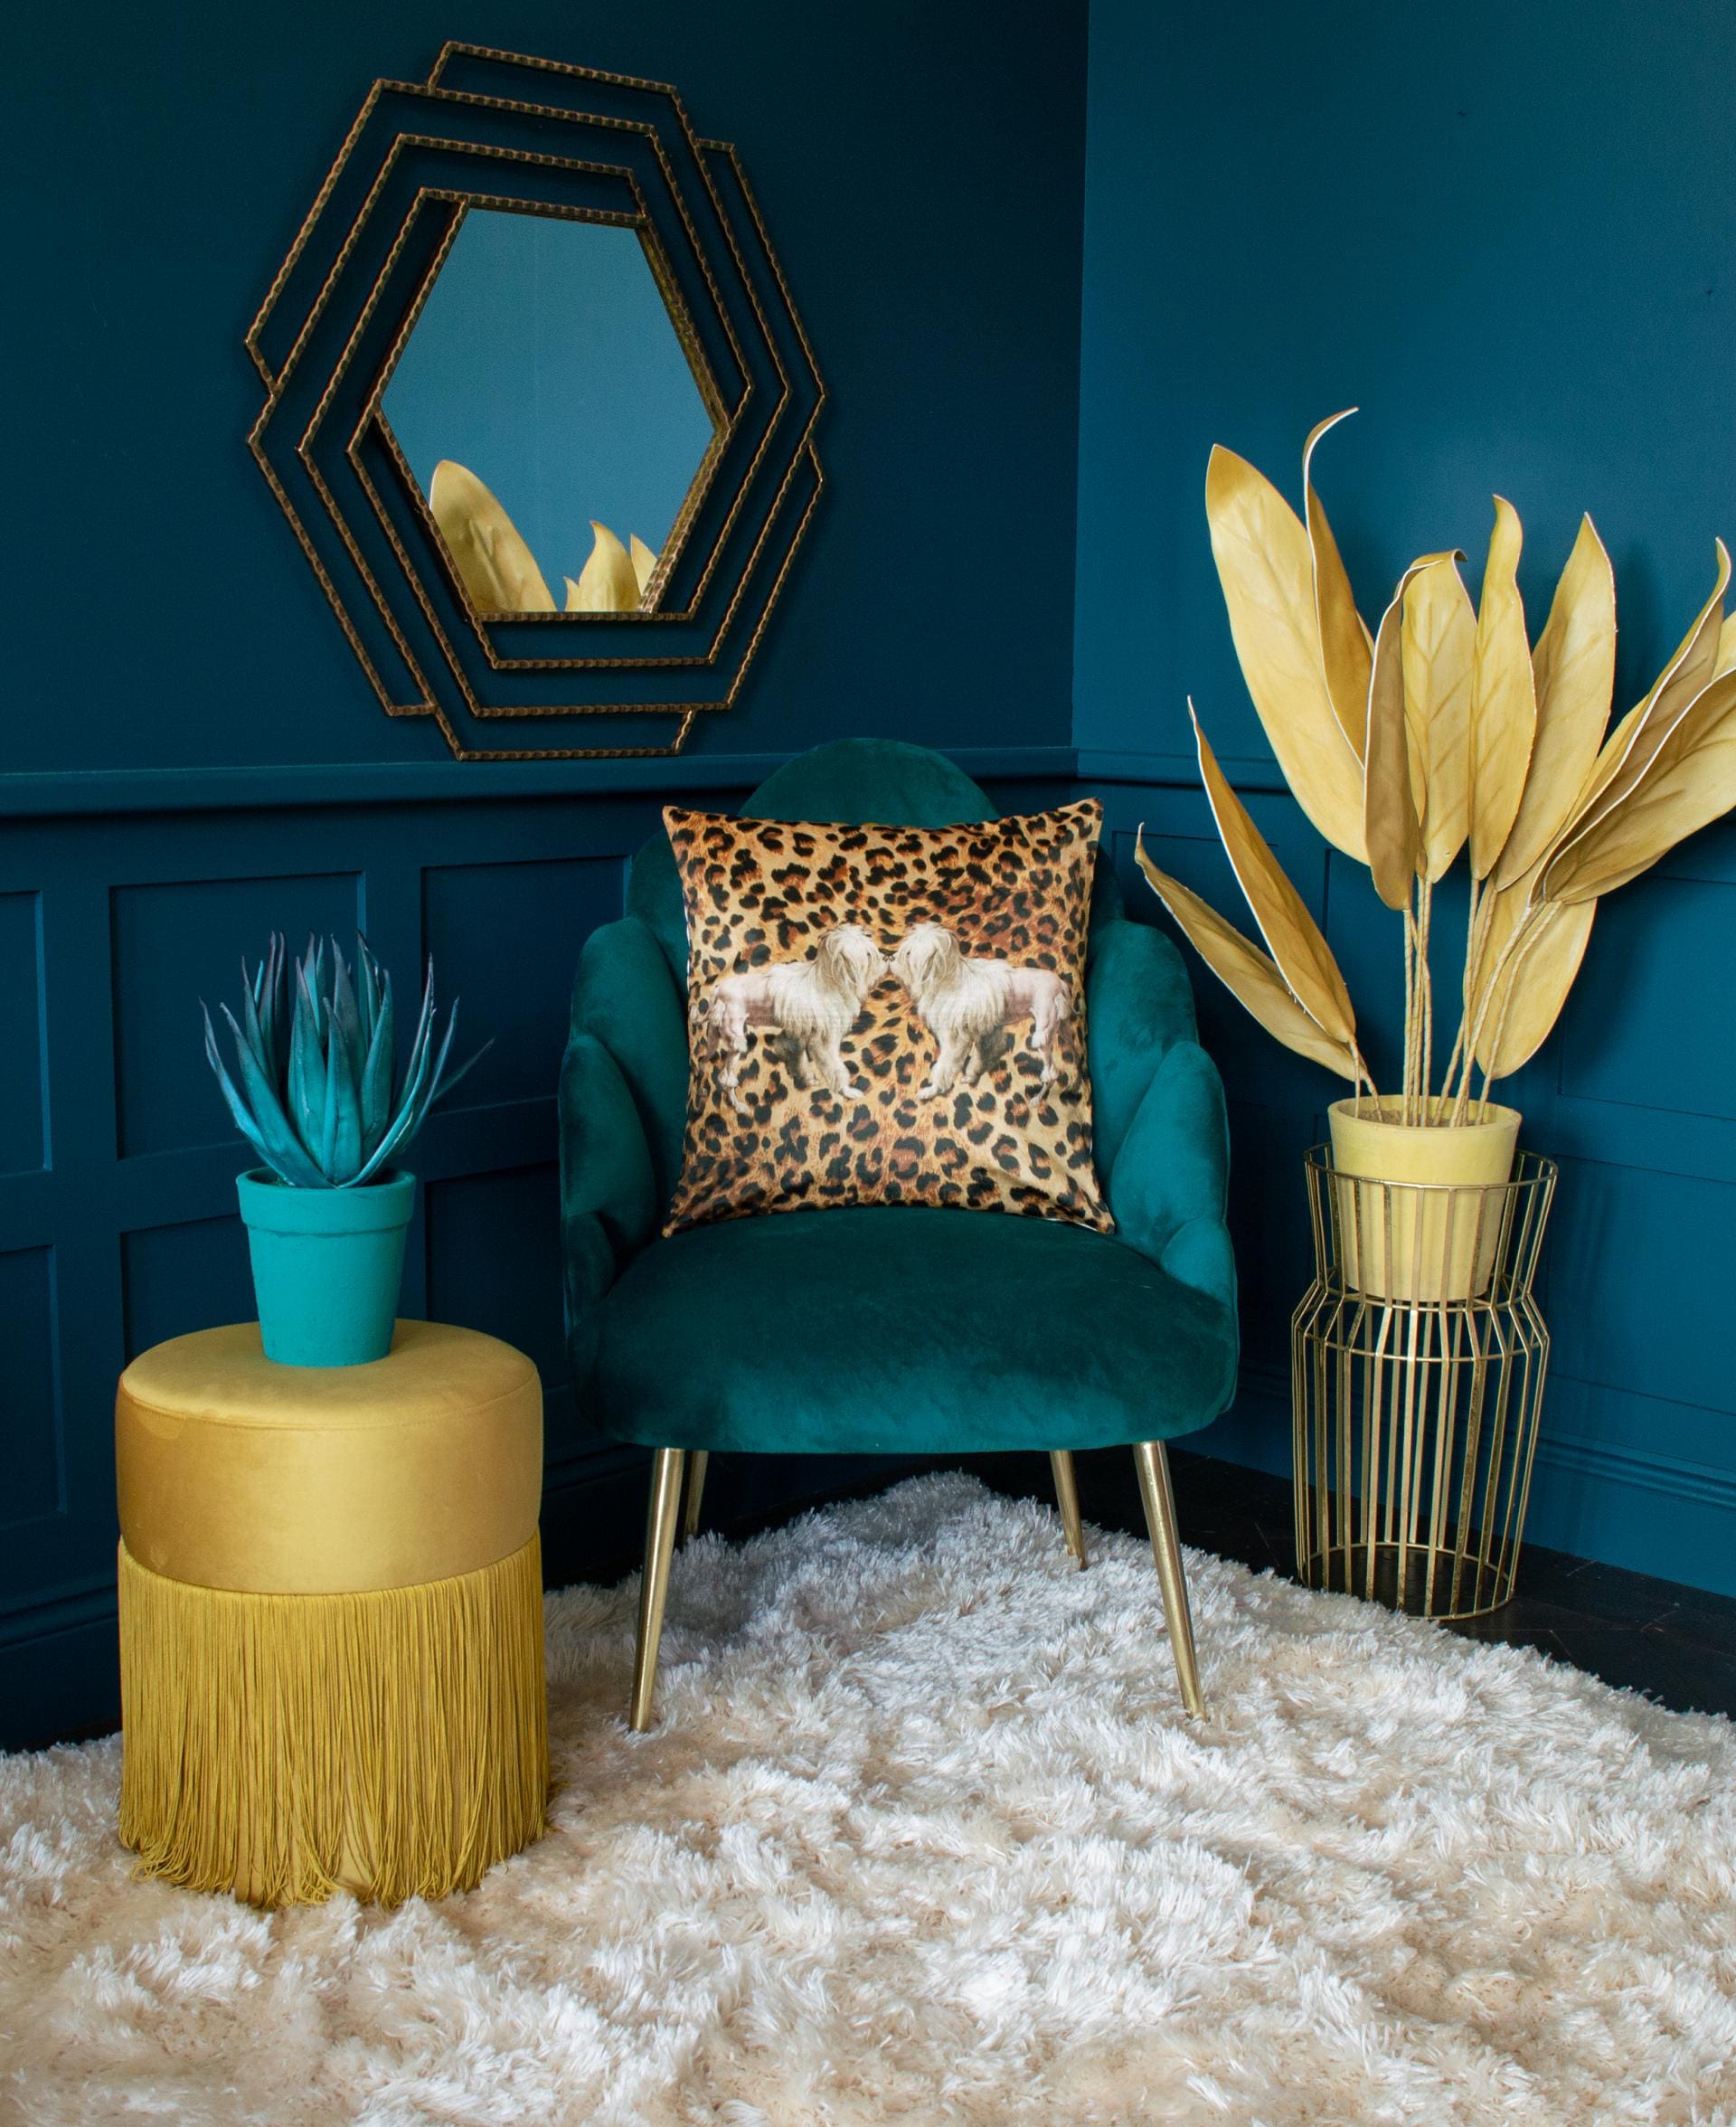 The Fringe Trend For Your Homes - The Interior Editor